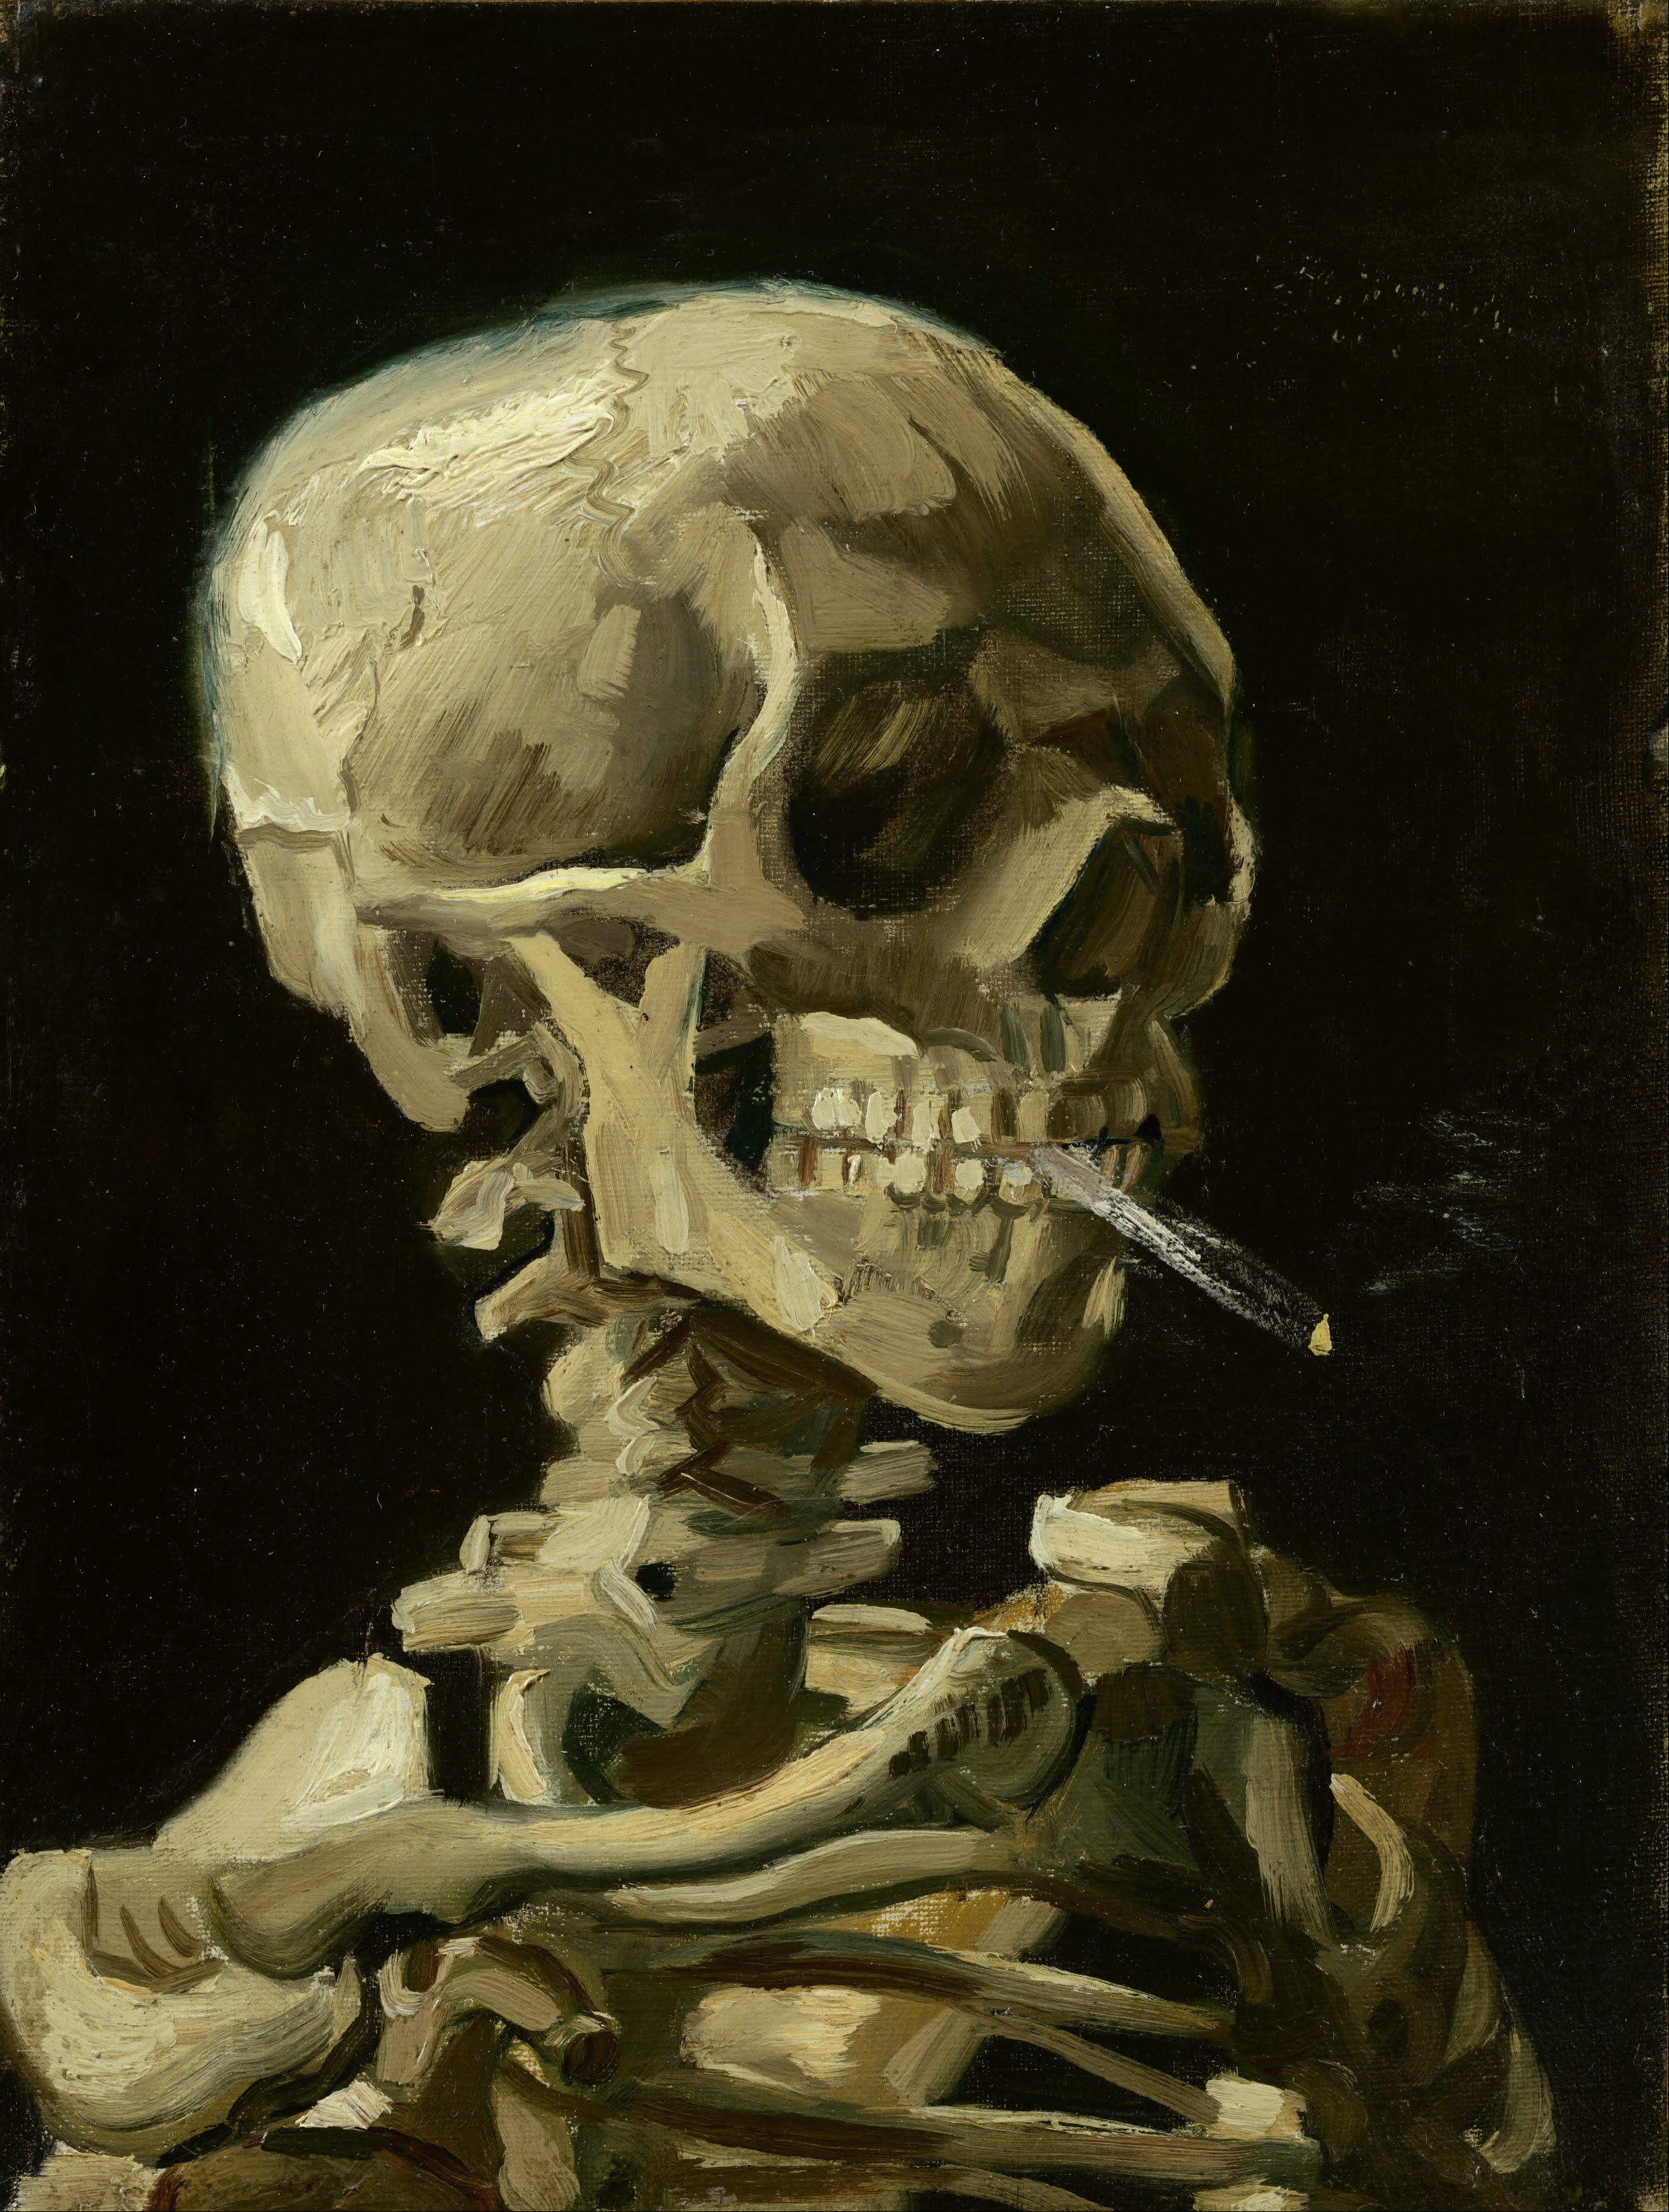 Scull with Cigarette by Vincent van Gogh - 1886 - 32 × 24.5 cm Van Gogh Museum